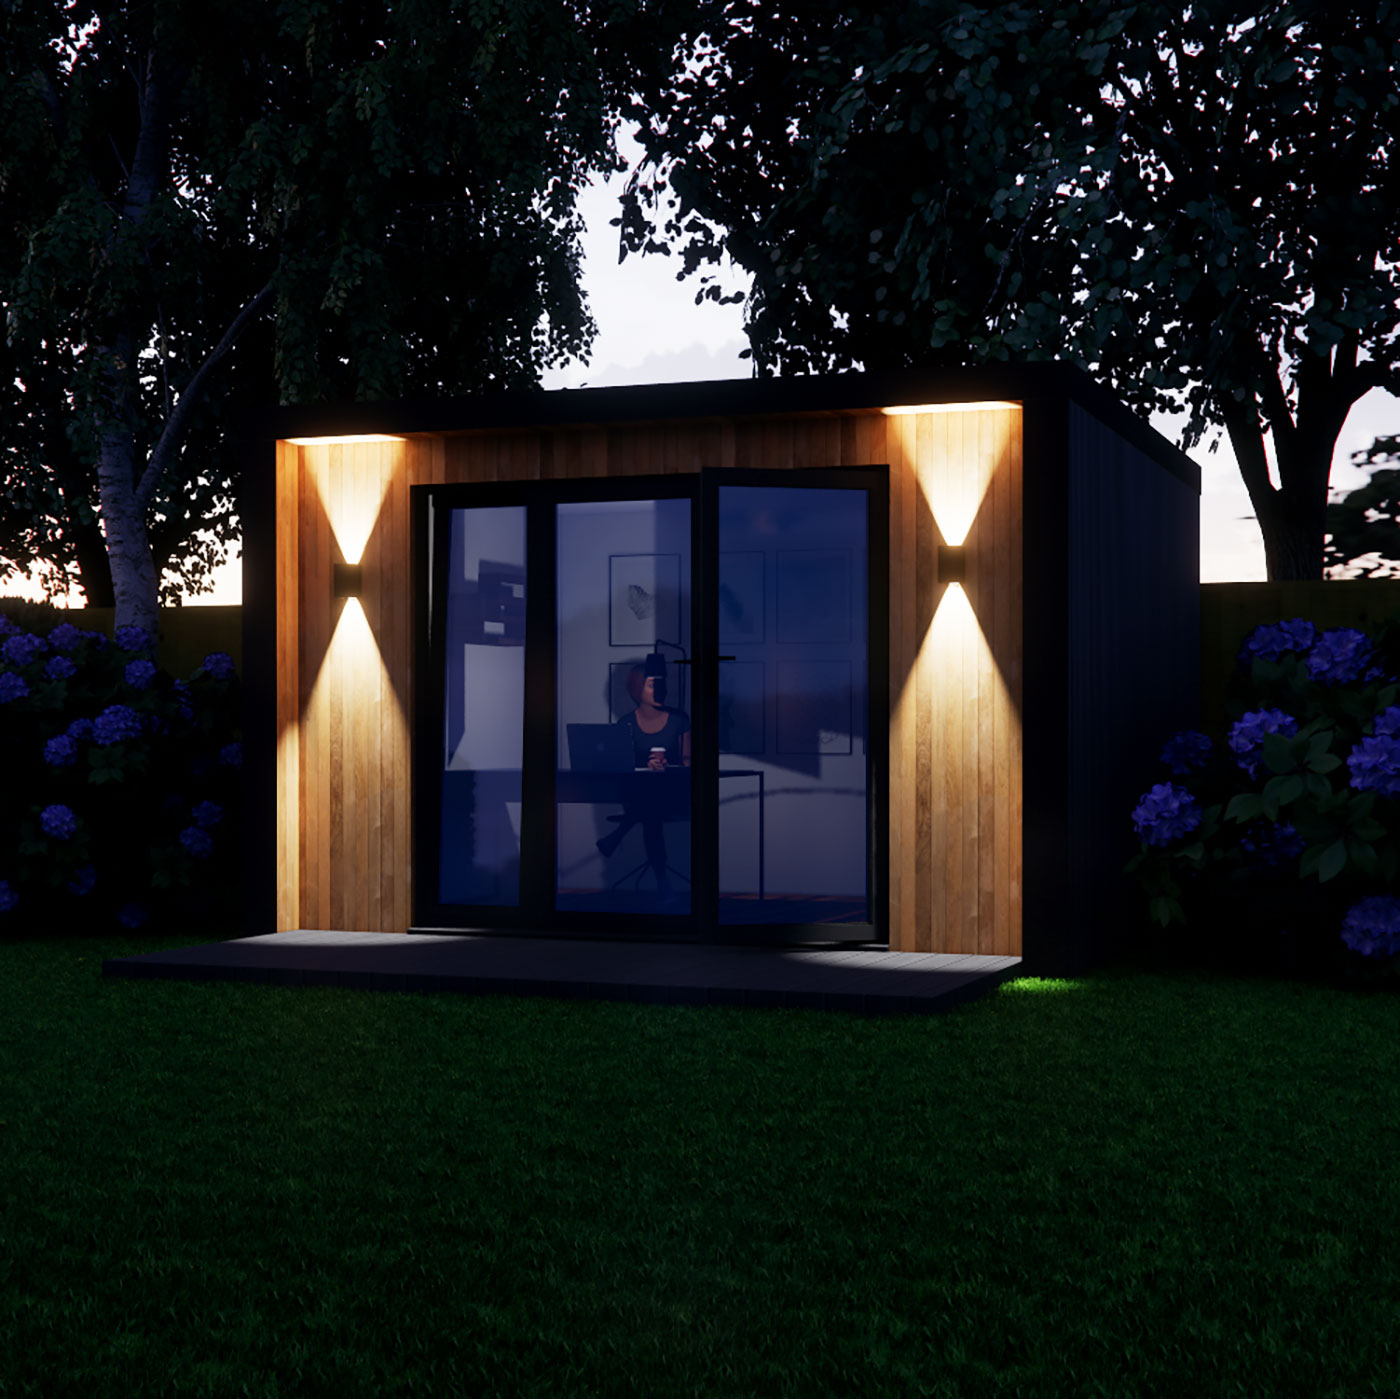 Night time visualisation of 3.2m by 3.8m garden room design